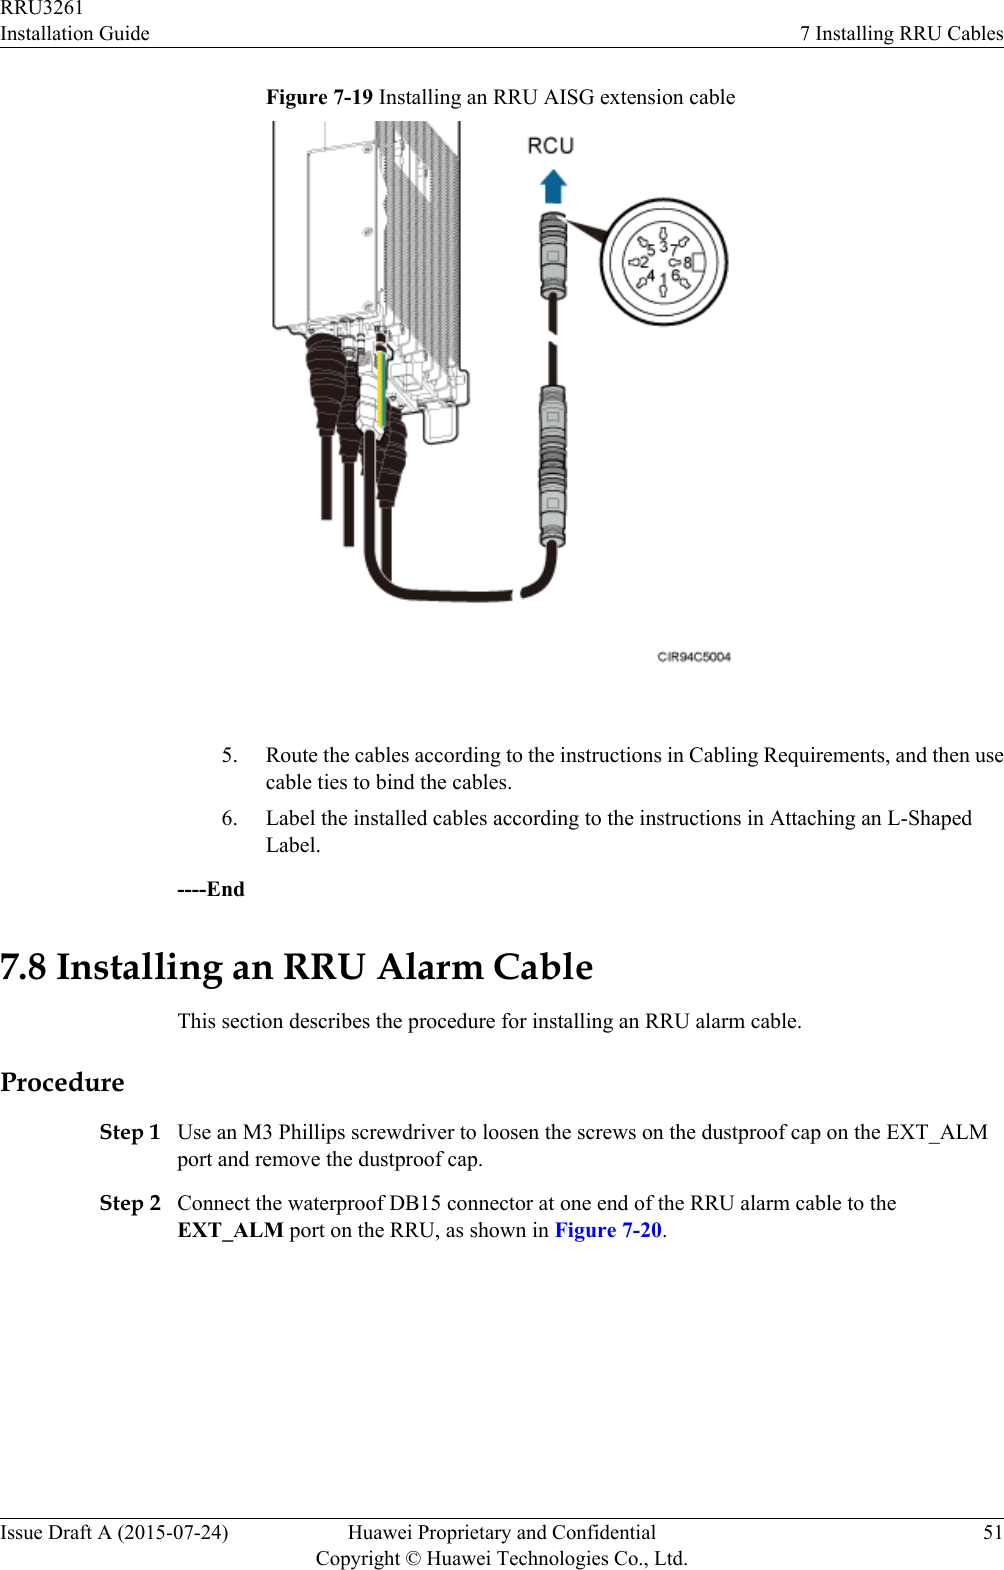 Figure 7-19 Installing an RRU AISG extension cable 5. Route the cables according to the instructions in Cabling Requirements, and then usecable ties to bind the cables.6. Label the installed cables according to the instructions in Attaching an L-ShapedLabel.----End7.8 Installing an RRU Alarm CableThis section describes the procedure for installing an RRU alarm cable.ProcedureStep 1 Use an M3 Phillips screwdriver to loosen the screws on the dustproof cap on the EXT_ALMport and remove the dustproof cap.Step 2 Connect the waterproof DB15 connector at one end of the RRU alarm cable to theEXT_ALM port on the RRU, as shown in Figure 7-20.RRU3261Installation Guide 7 Installing RRU CablesIssue Draft A (2015-07-24) Huawei Proprietary and ConfidentialCopyright © Huawei Technologies Co., Ltd.51